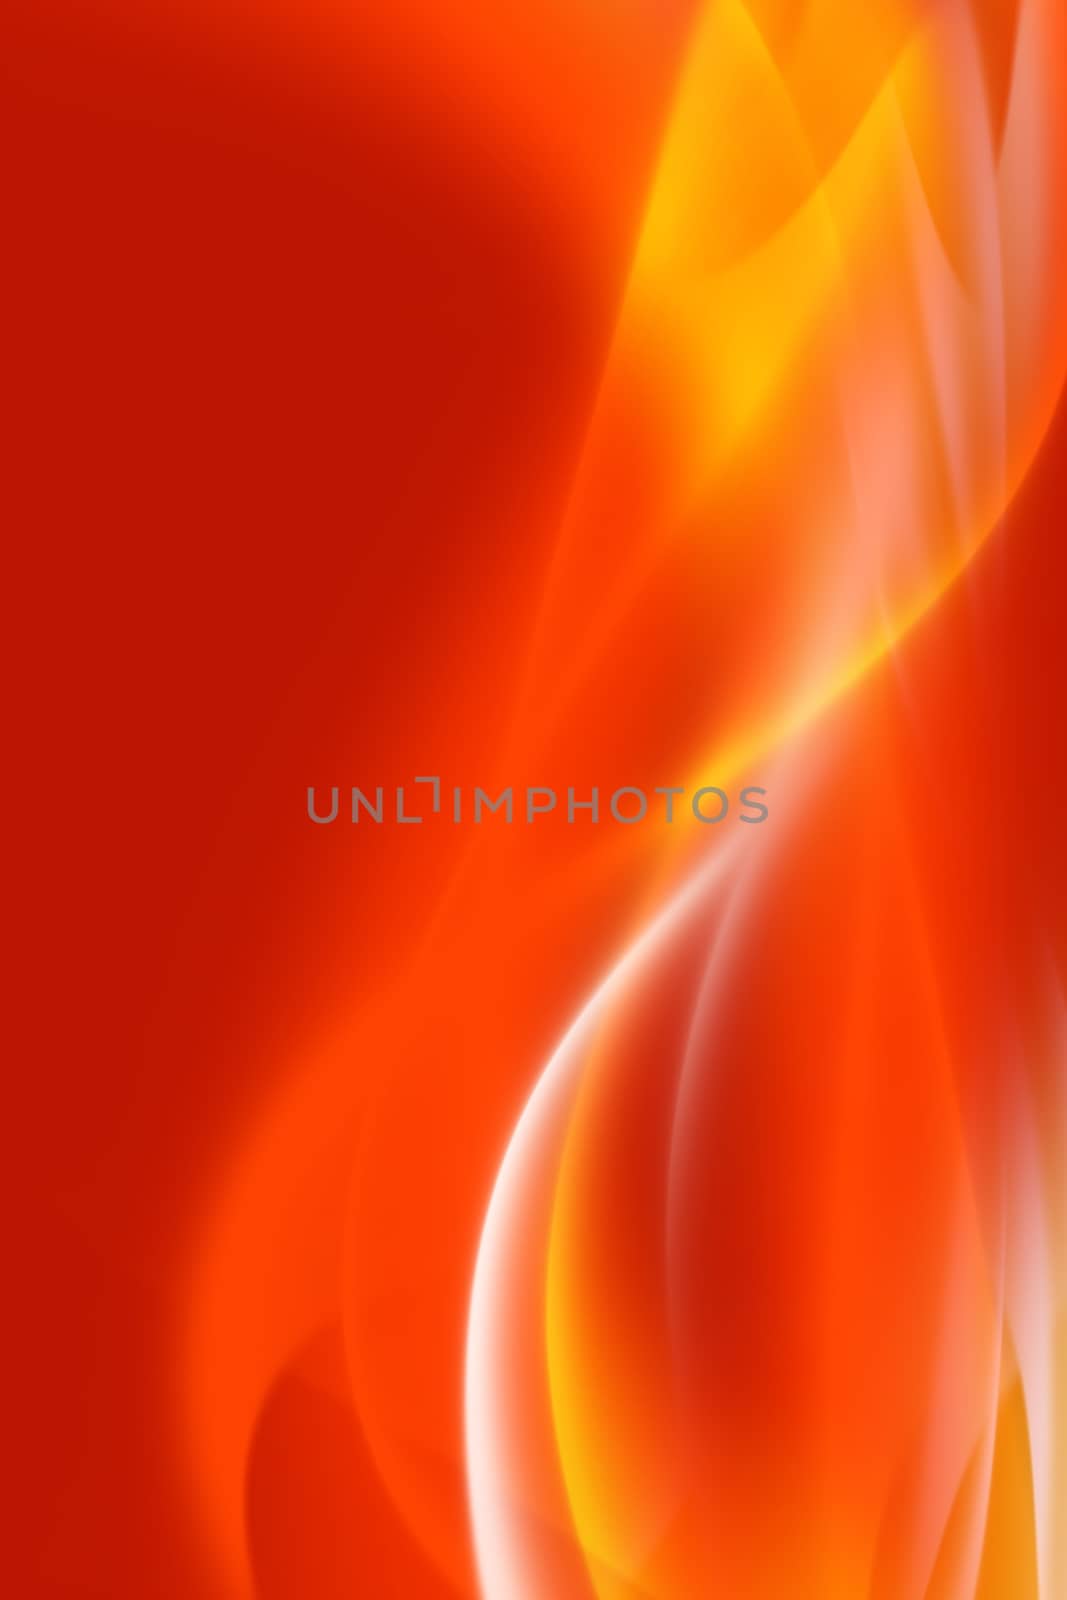 Ghosty Burn Background. Fire Like Misty Vertical Background. Simple and Very Elegant. Hot Background!